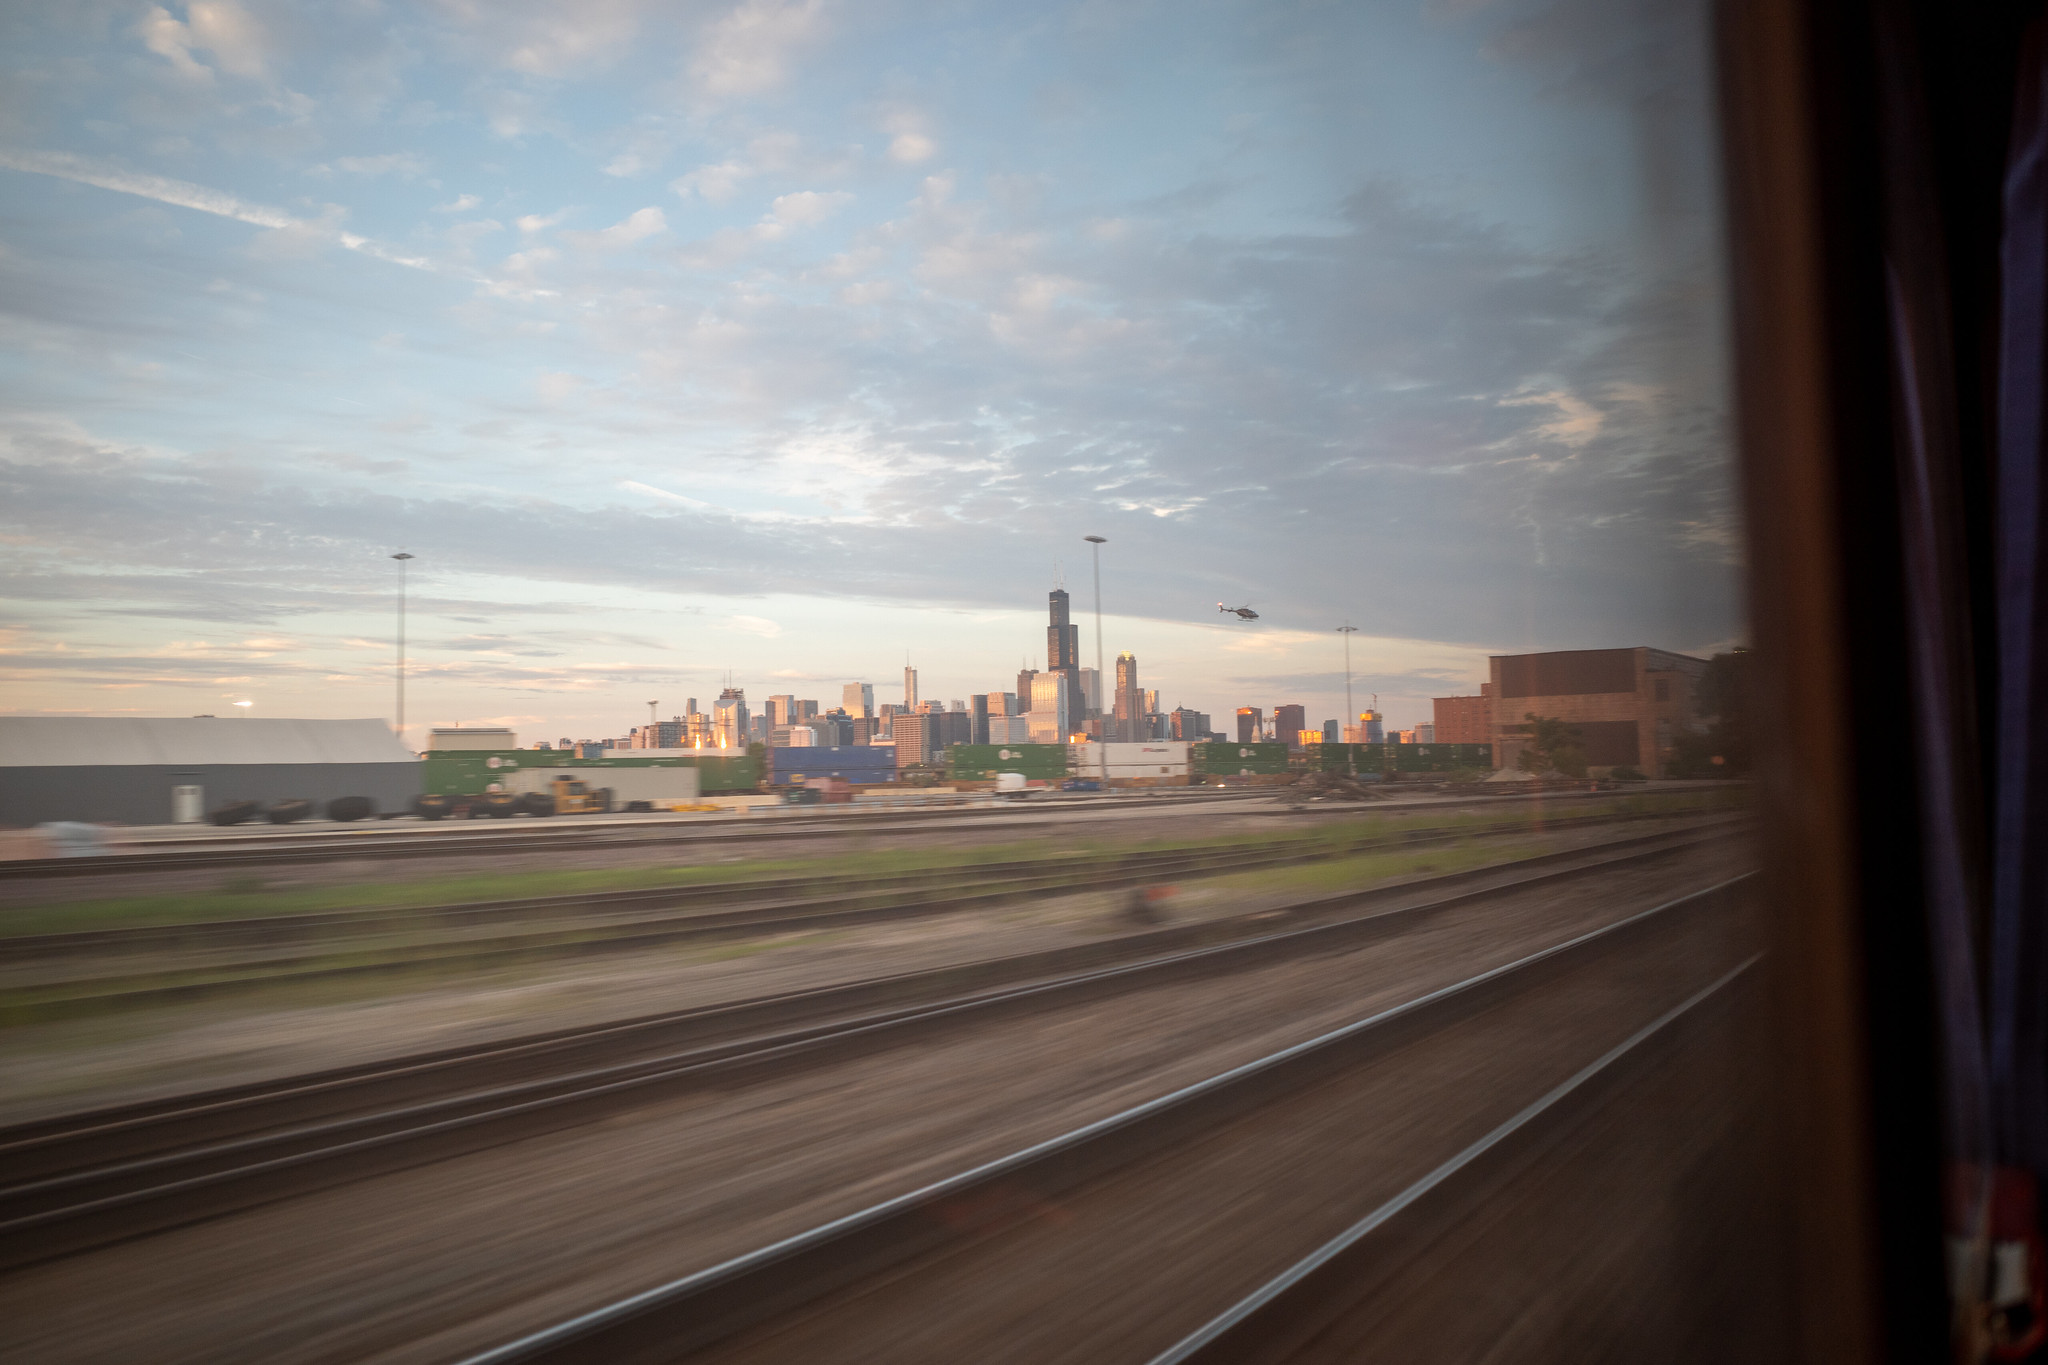 The distant Chicago skyline stands tall beyond a helicopter and the motion blurred train tracks